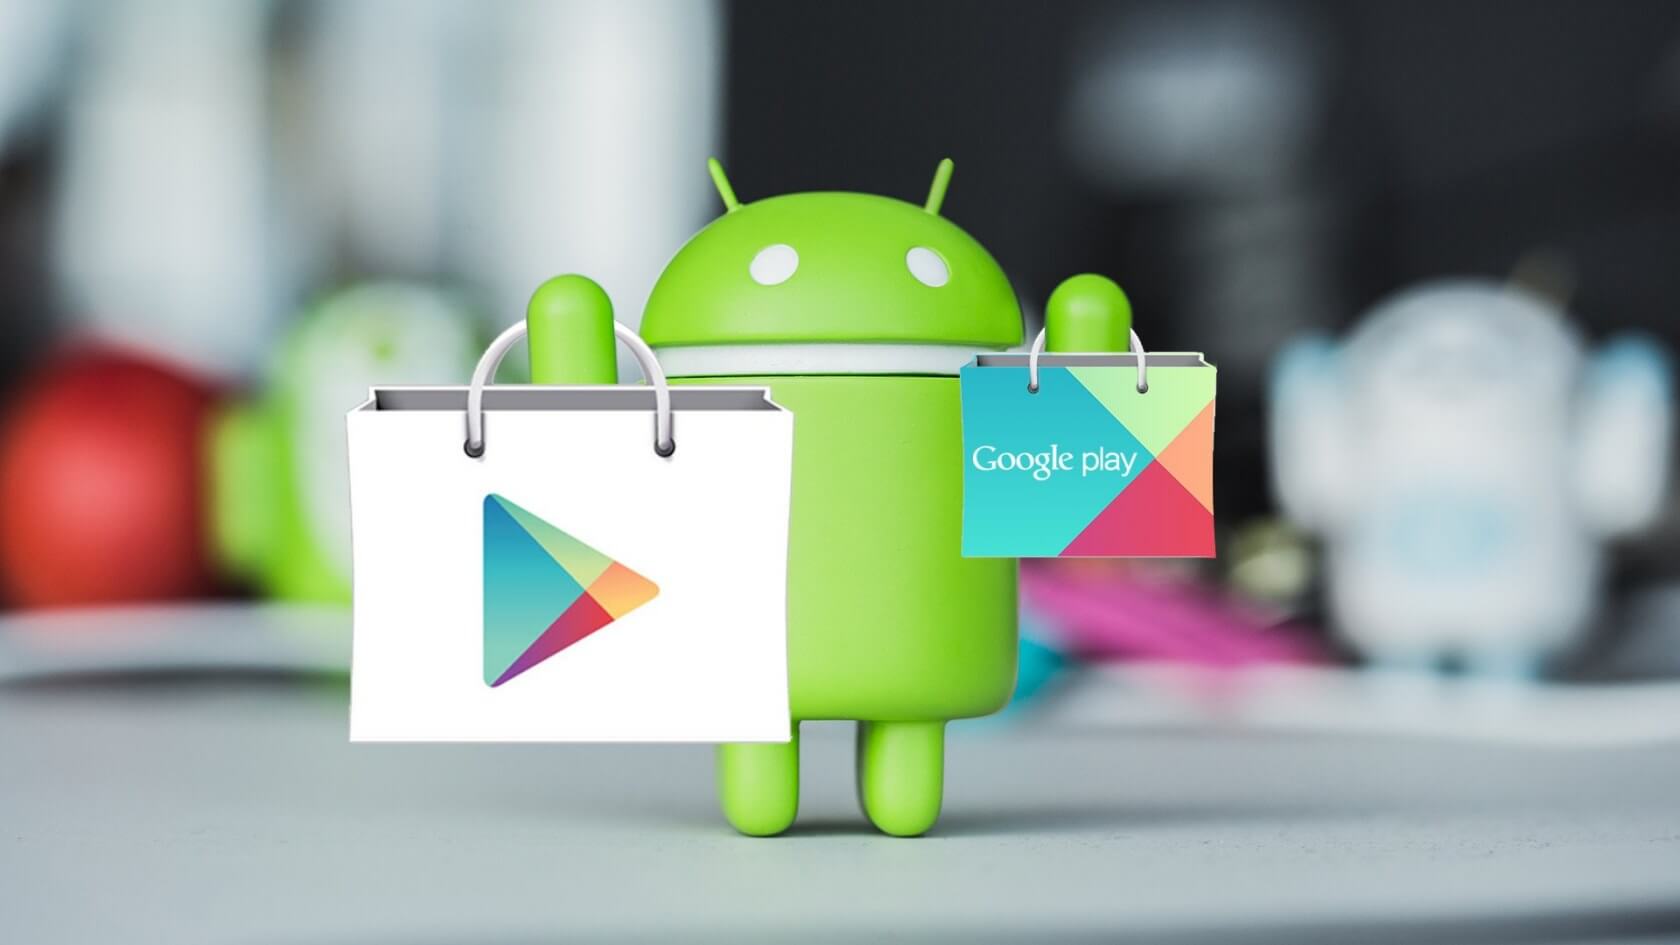 Over 500,000 Google Play Store users installed malware-ridden apps from a single creator